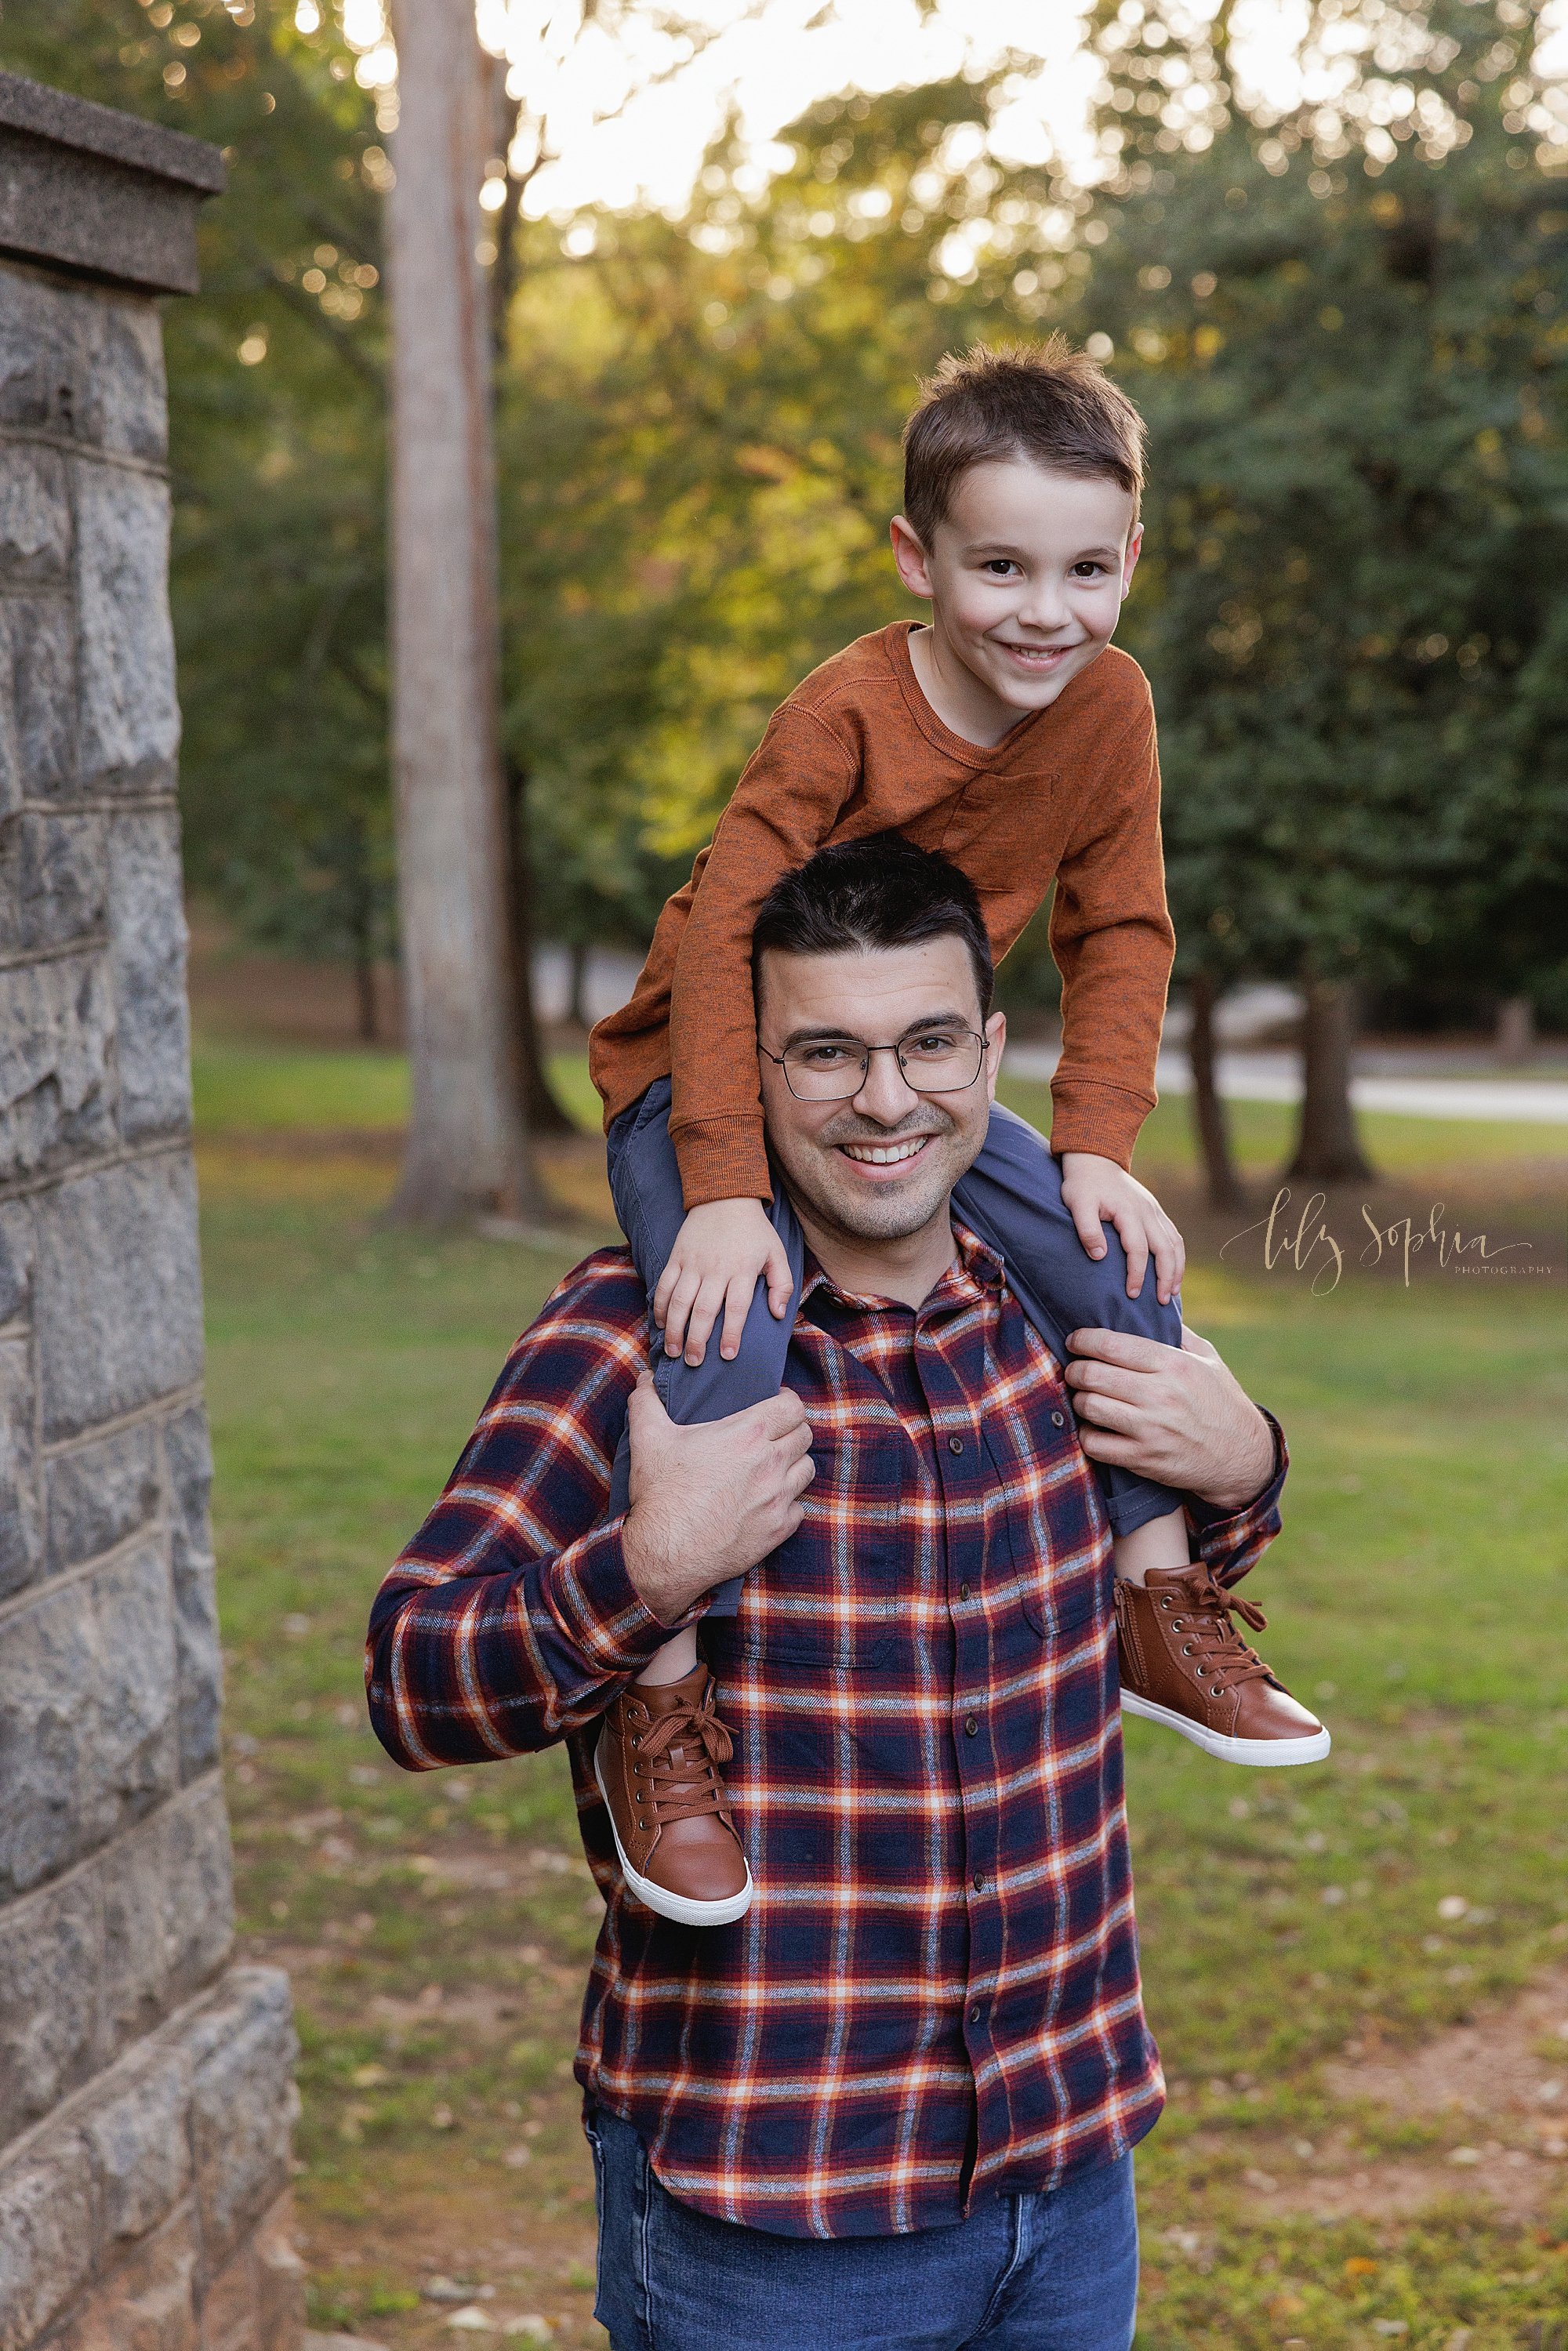 intown-atlanta-decatur-brookhaven-buckhead-outdoor-fall-pictures-family-photoshoot_5546.jpg